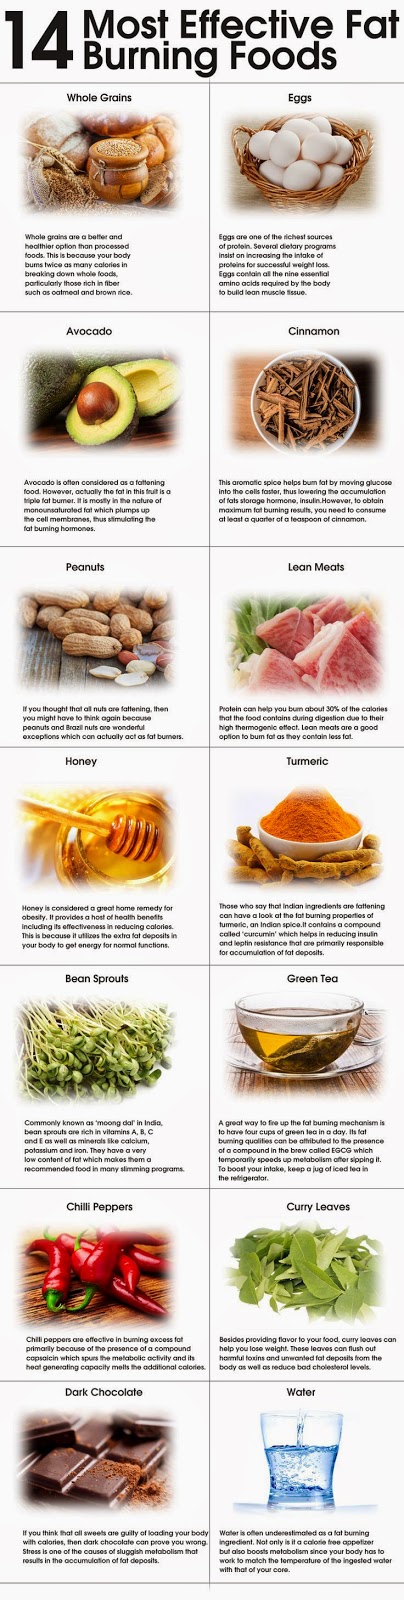 Health conscious individuals: These foods are critically important to keep in your diet routine. 